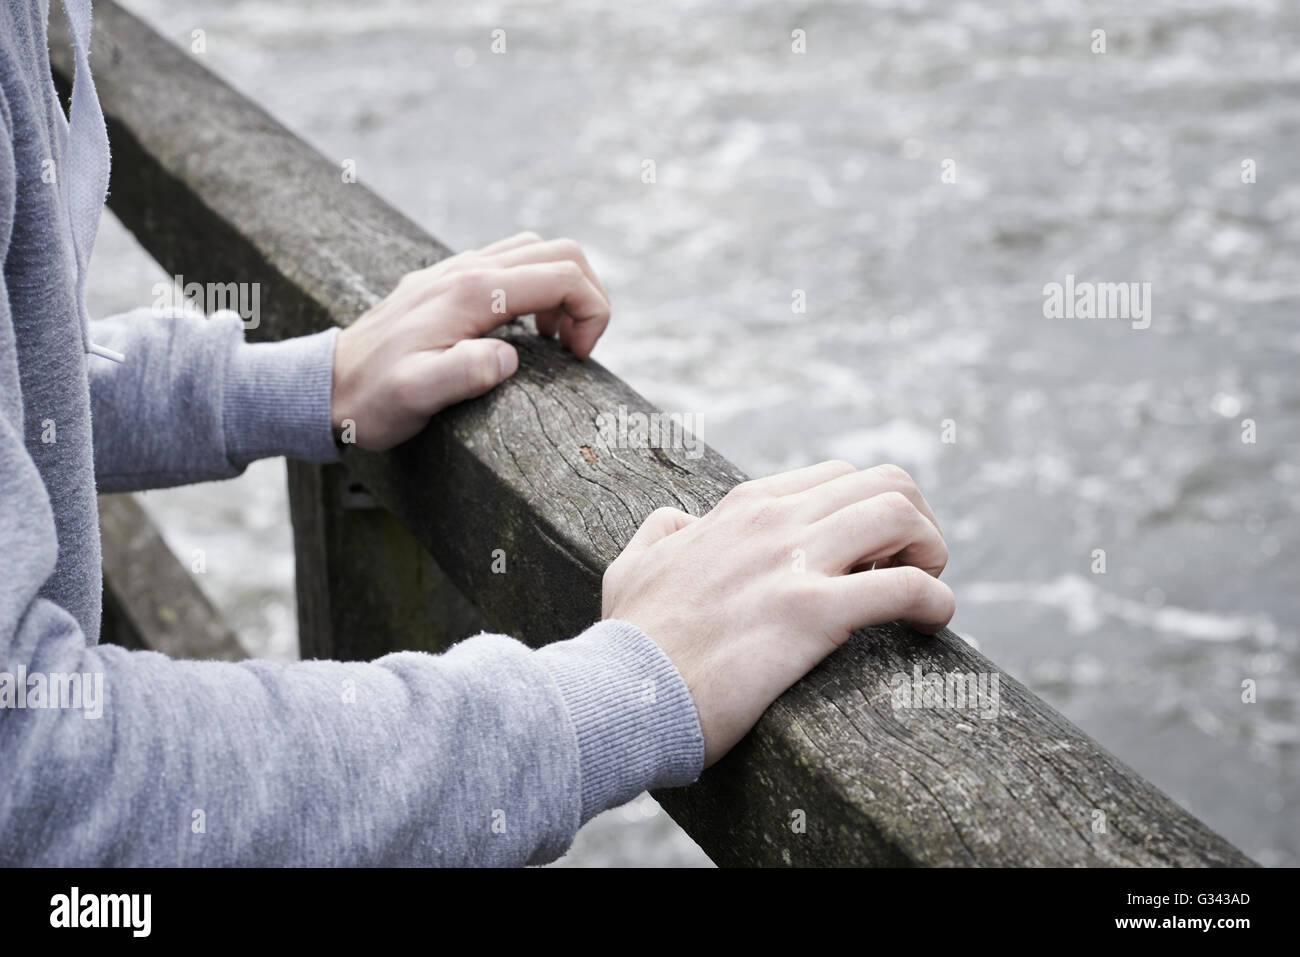 Depressed Young Man Contemplating Suicide On Bridge Over River Stock Photo